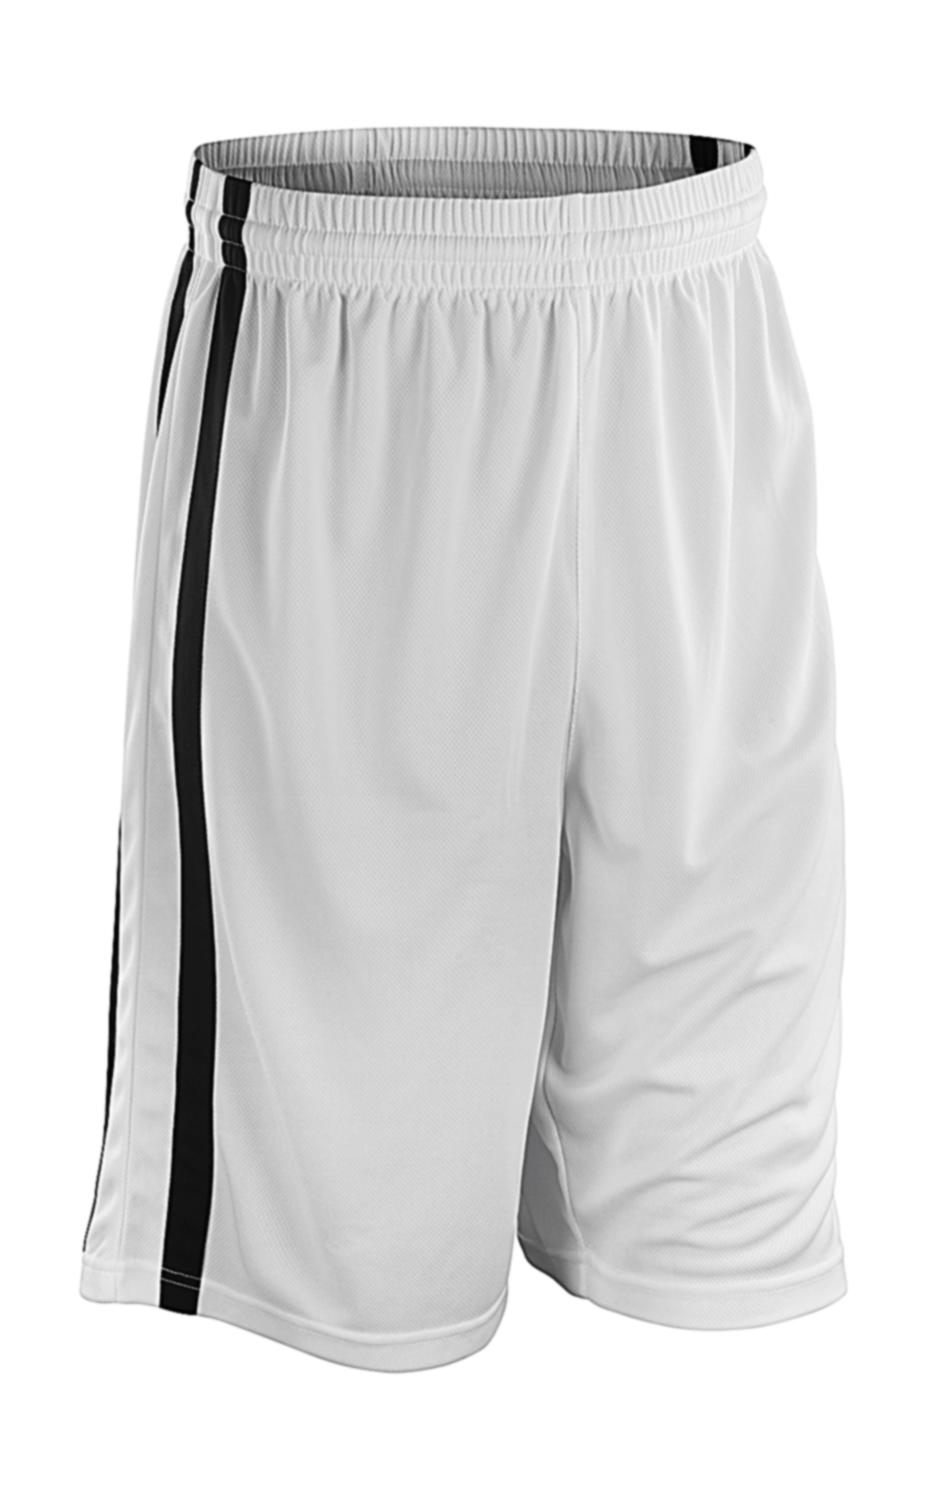  Mens Quick Dry Basketball Shorts in Farbe White/Black